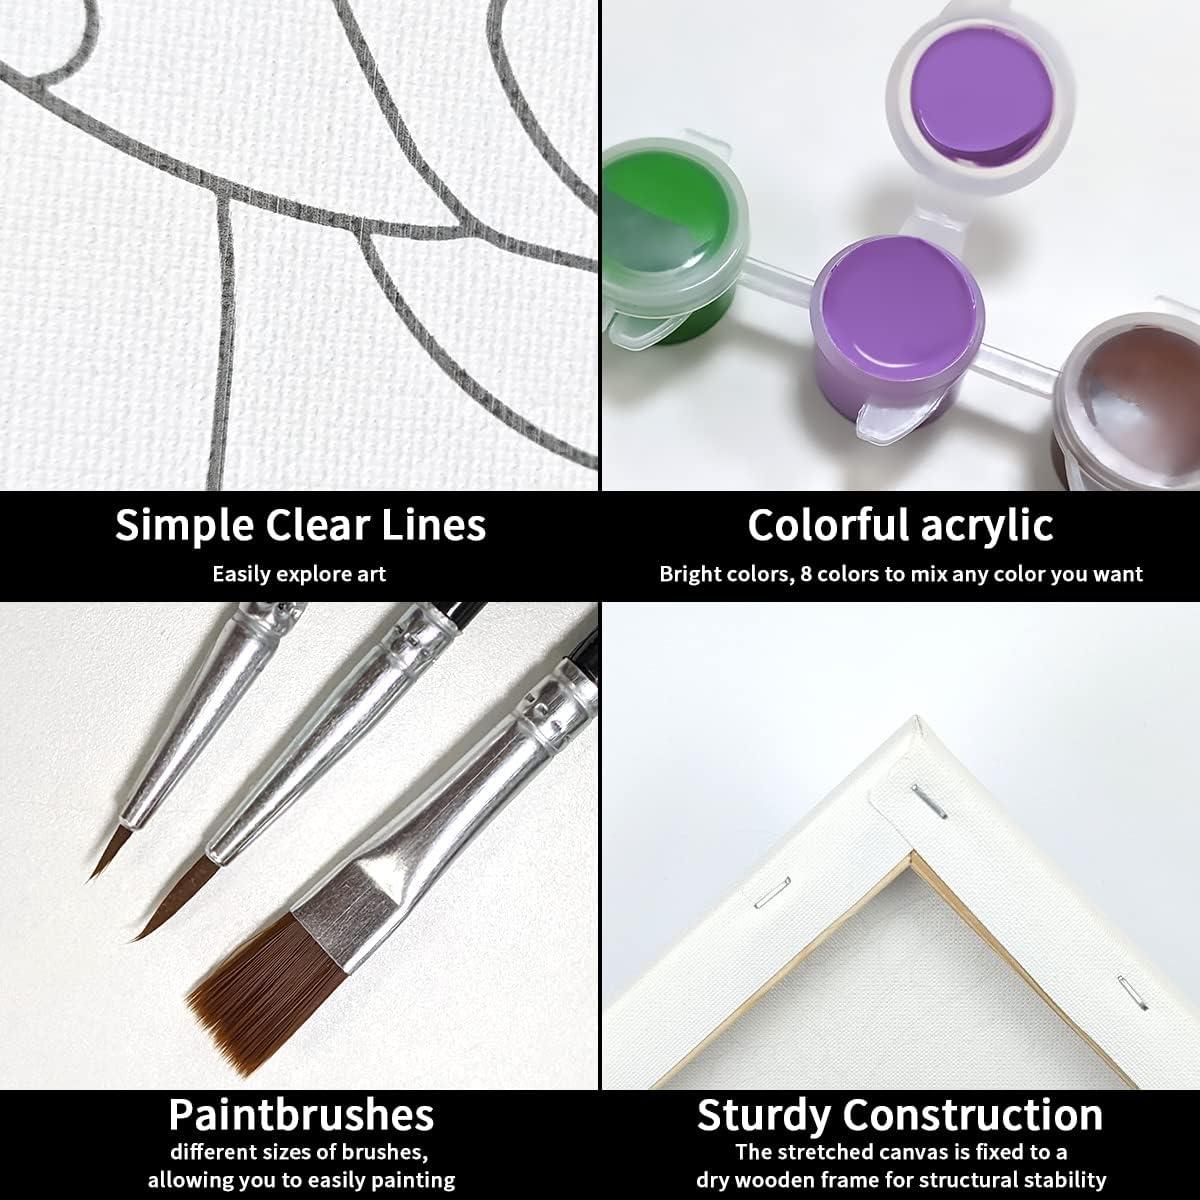 VOCHIC Canvas Painting Kit Pre Drawn Canvas for Painting for